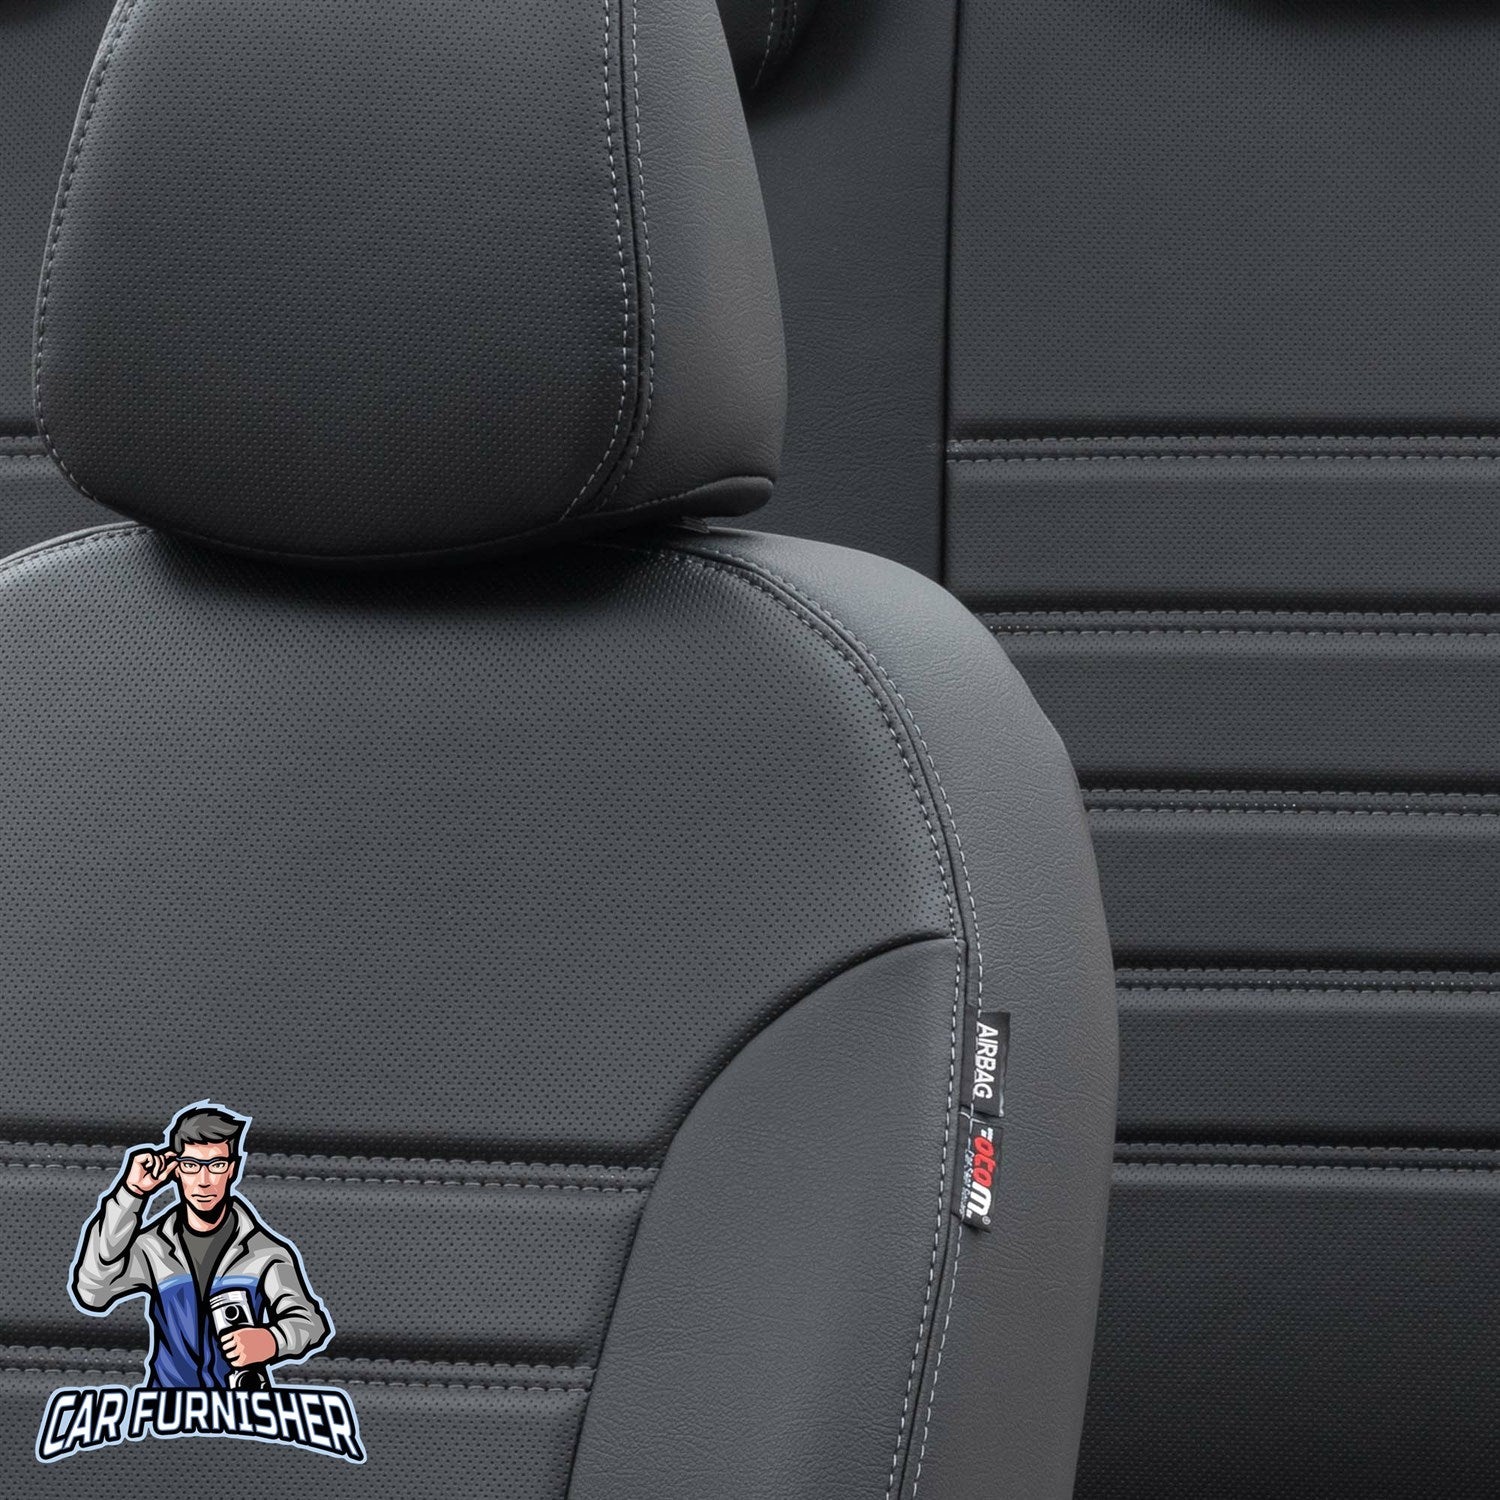 Citroen C4 Seat Cover Istanbul Leather Design Black Leather